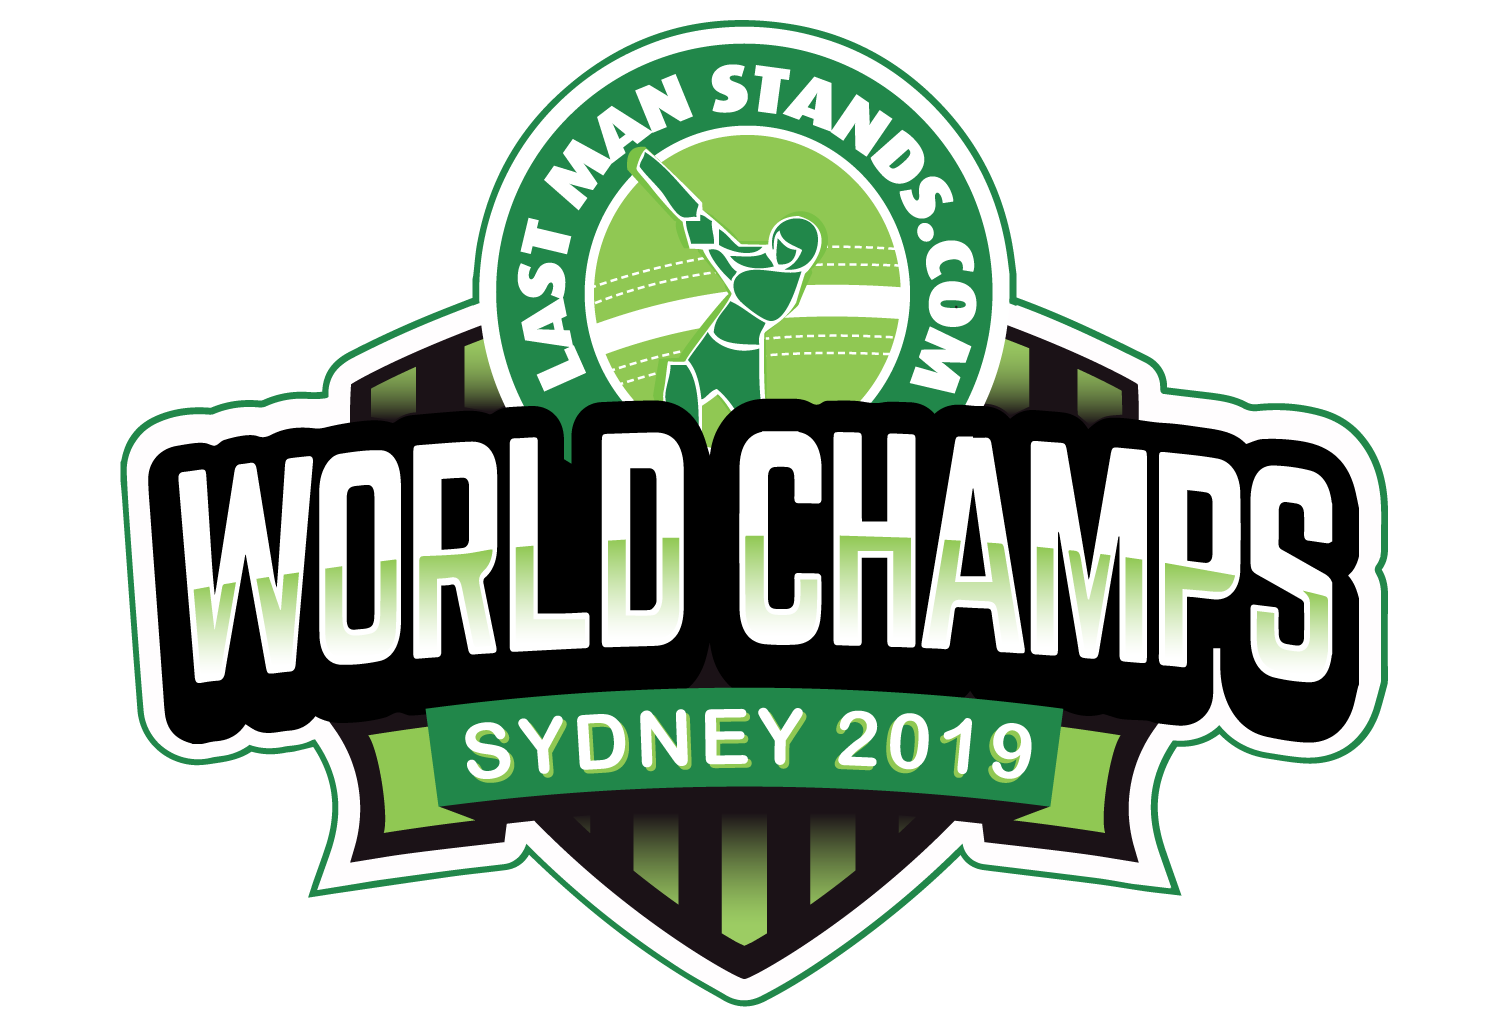 Last Man Stands World Champs 2019